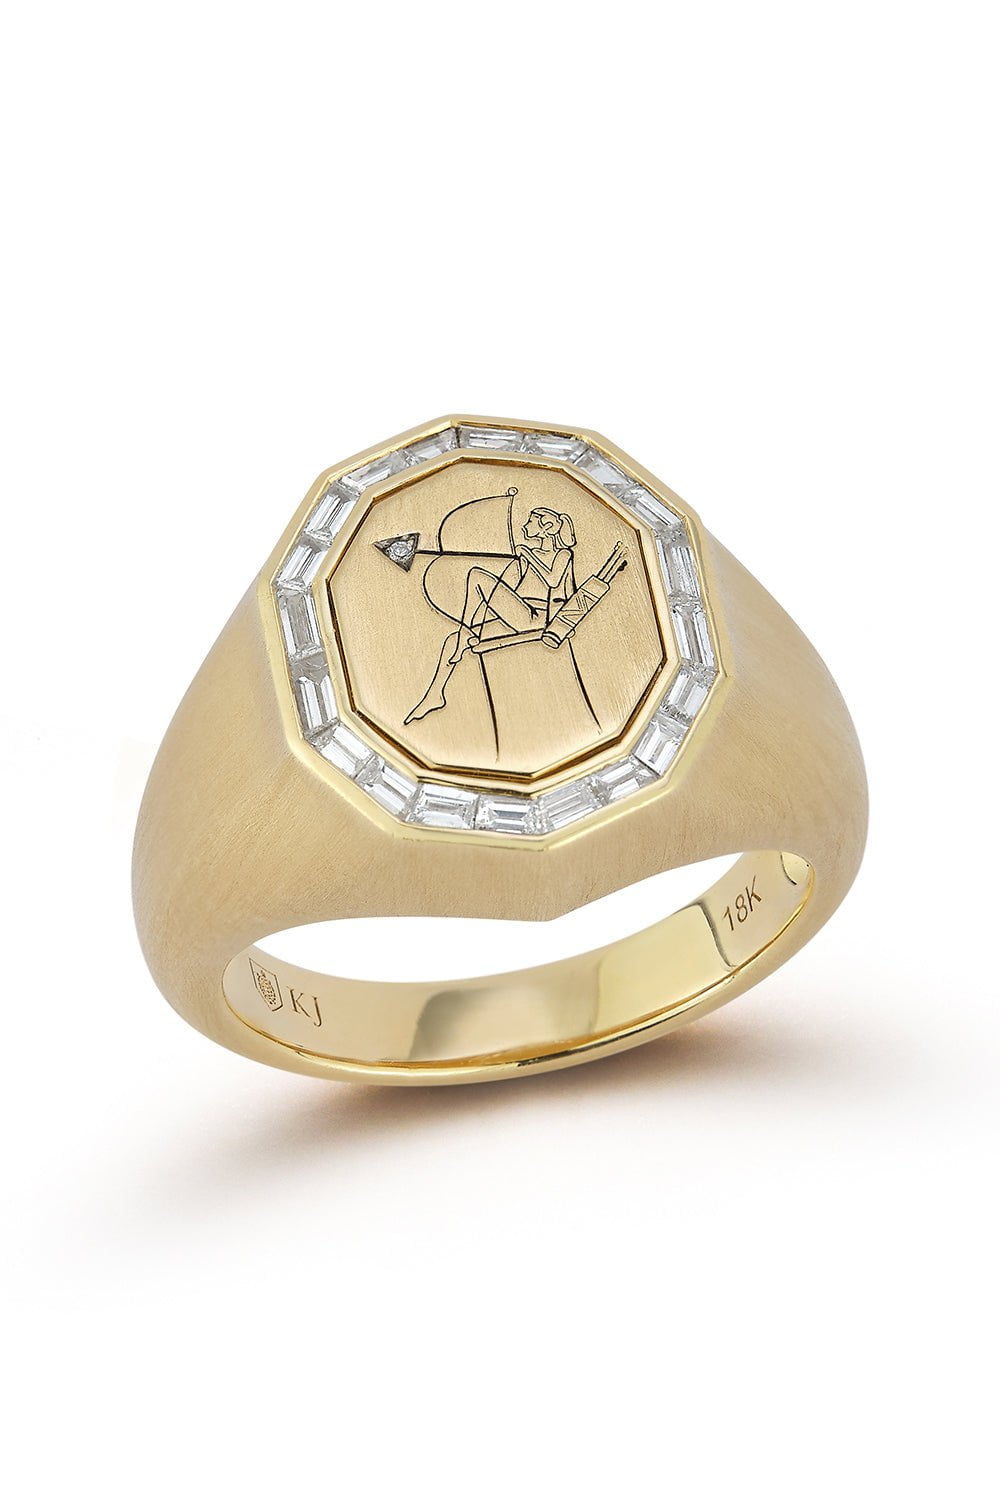 KATHERINE JETTER-The Baguette Archeress Ring-YELLOW GOLD